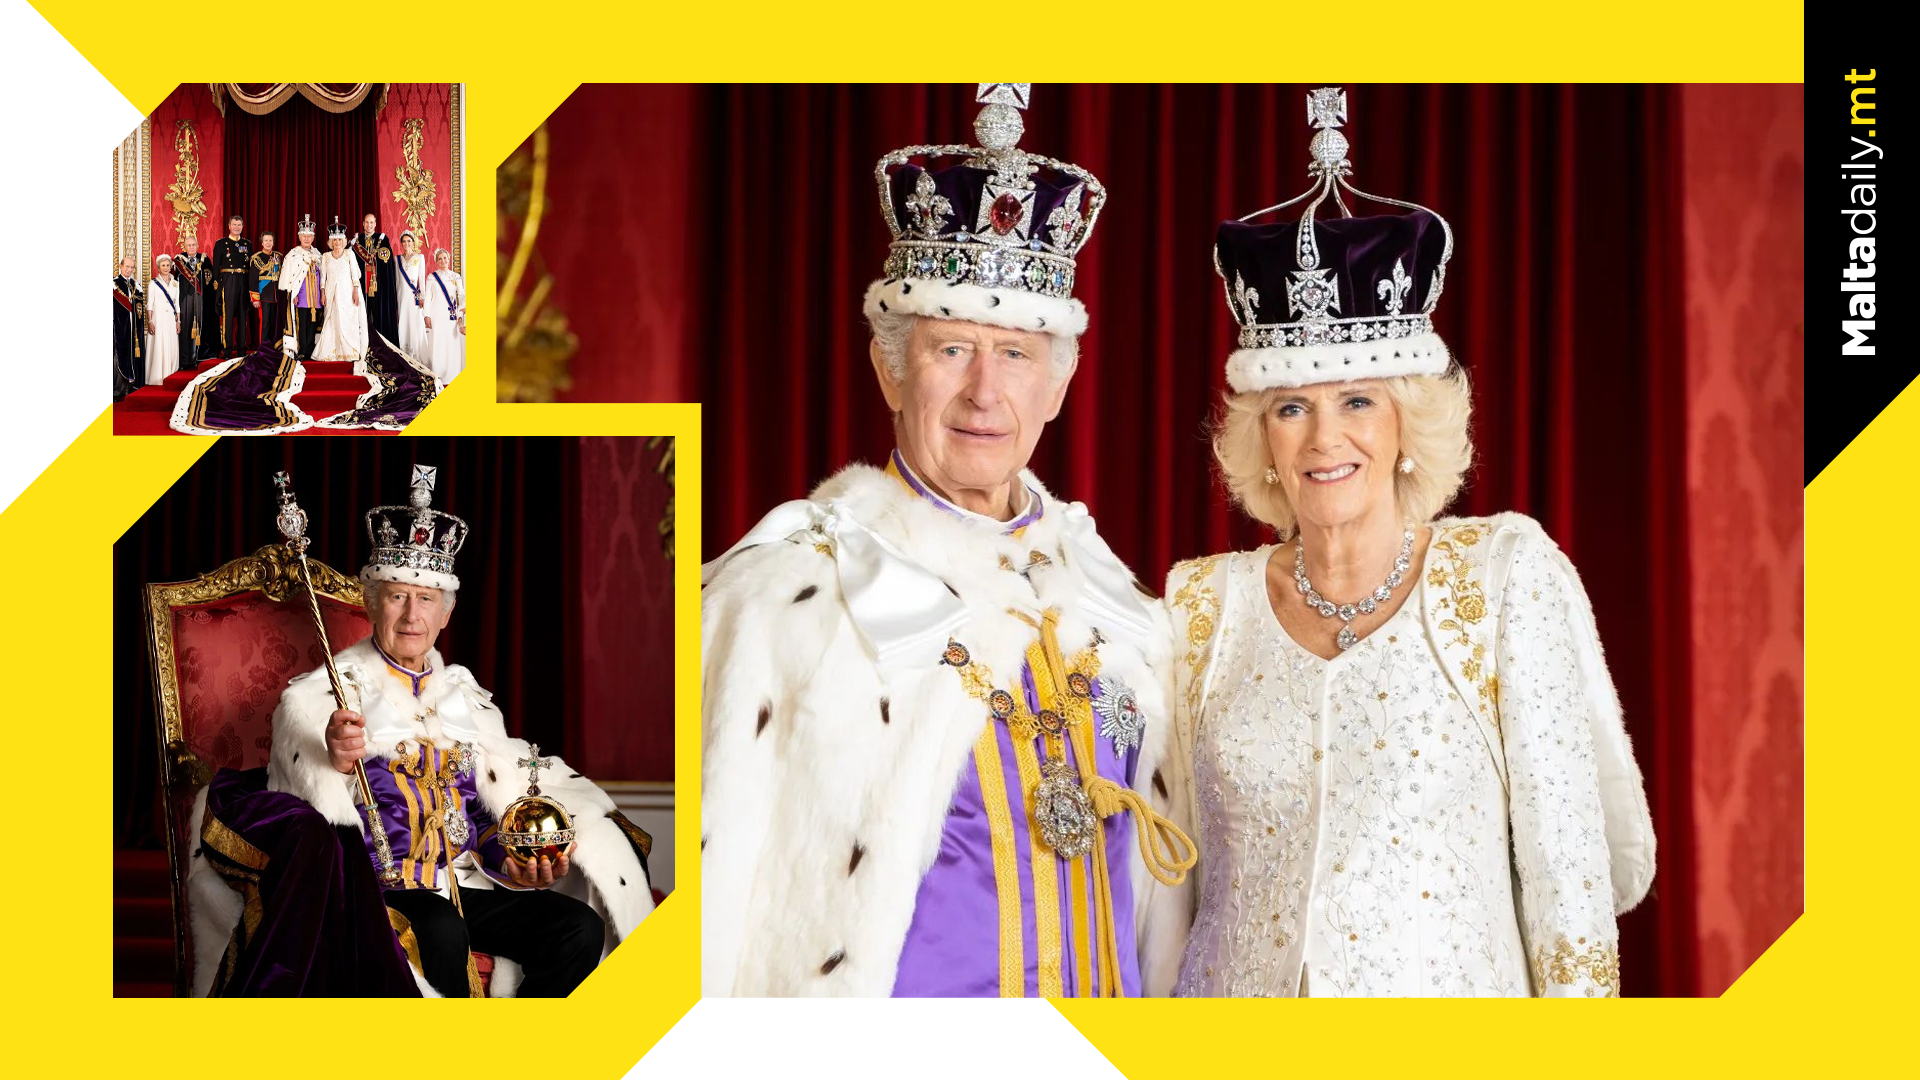 Here are the official portraits for the new King and Queen